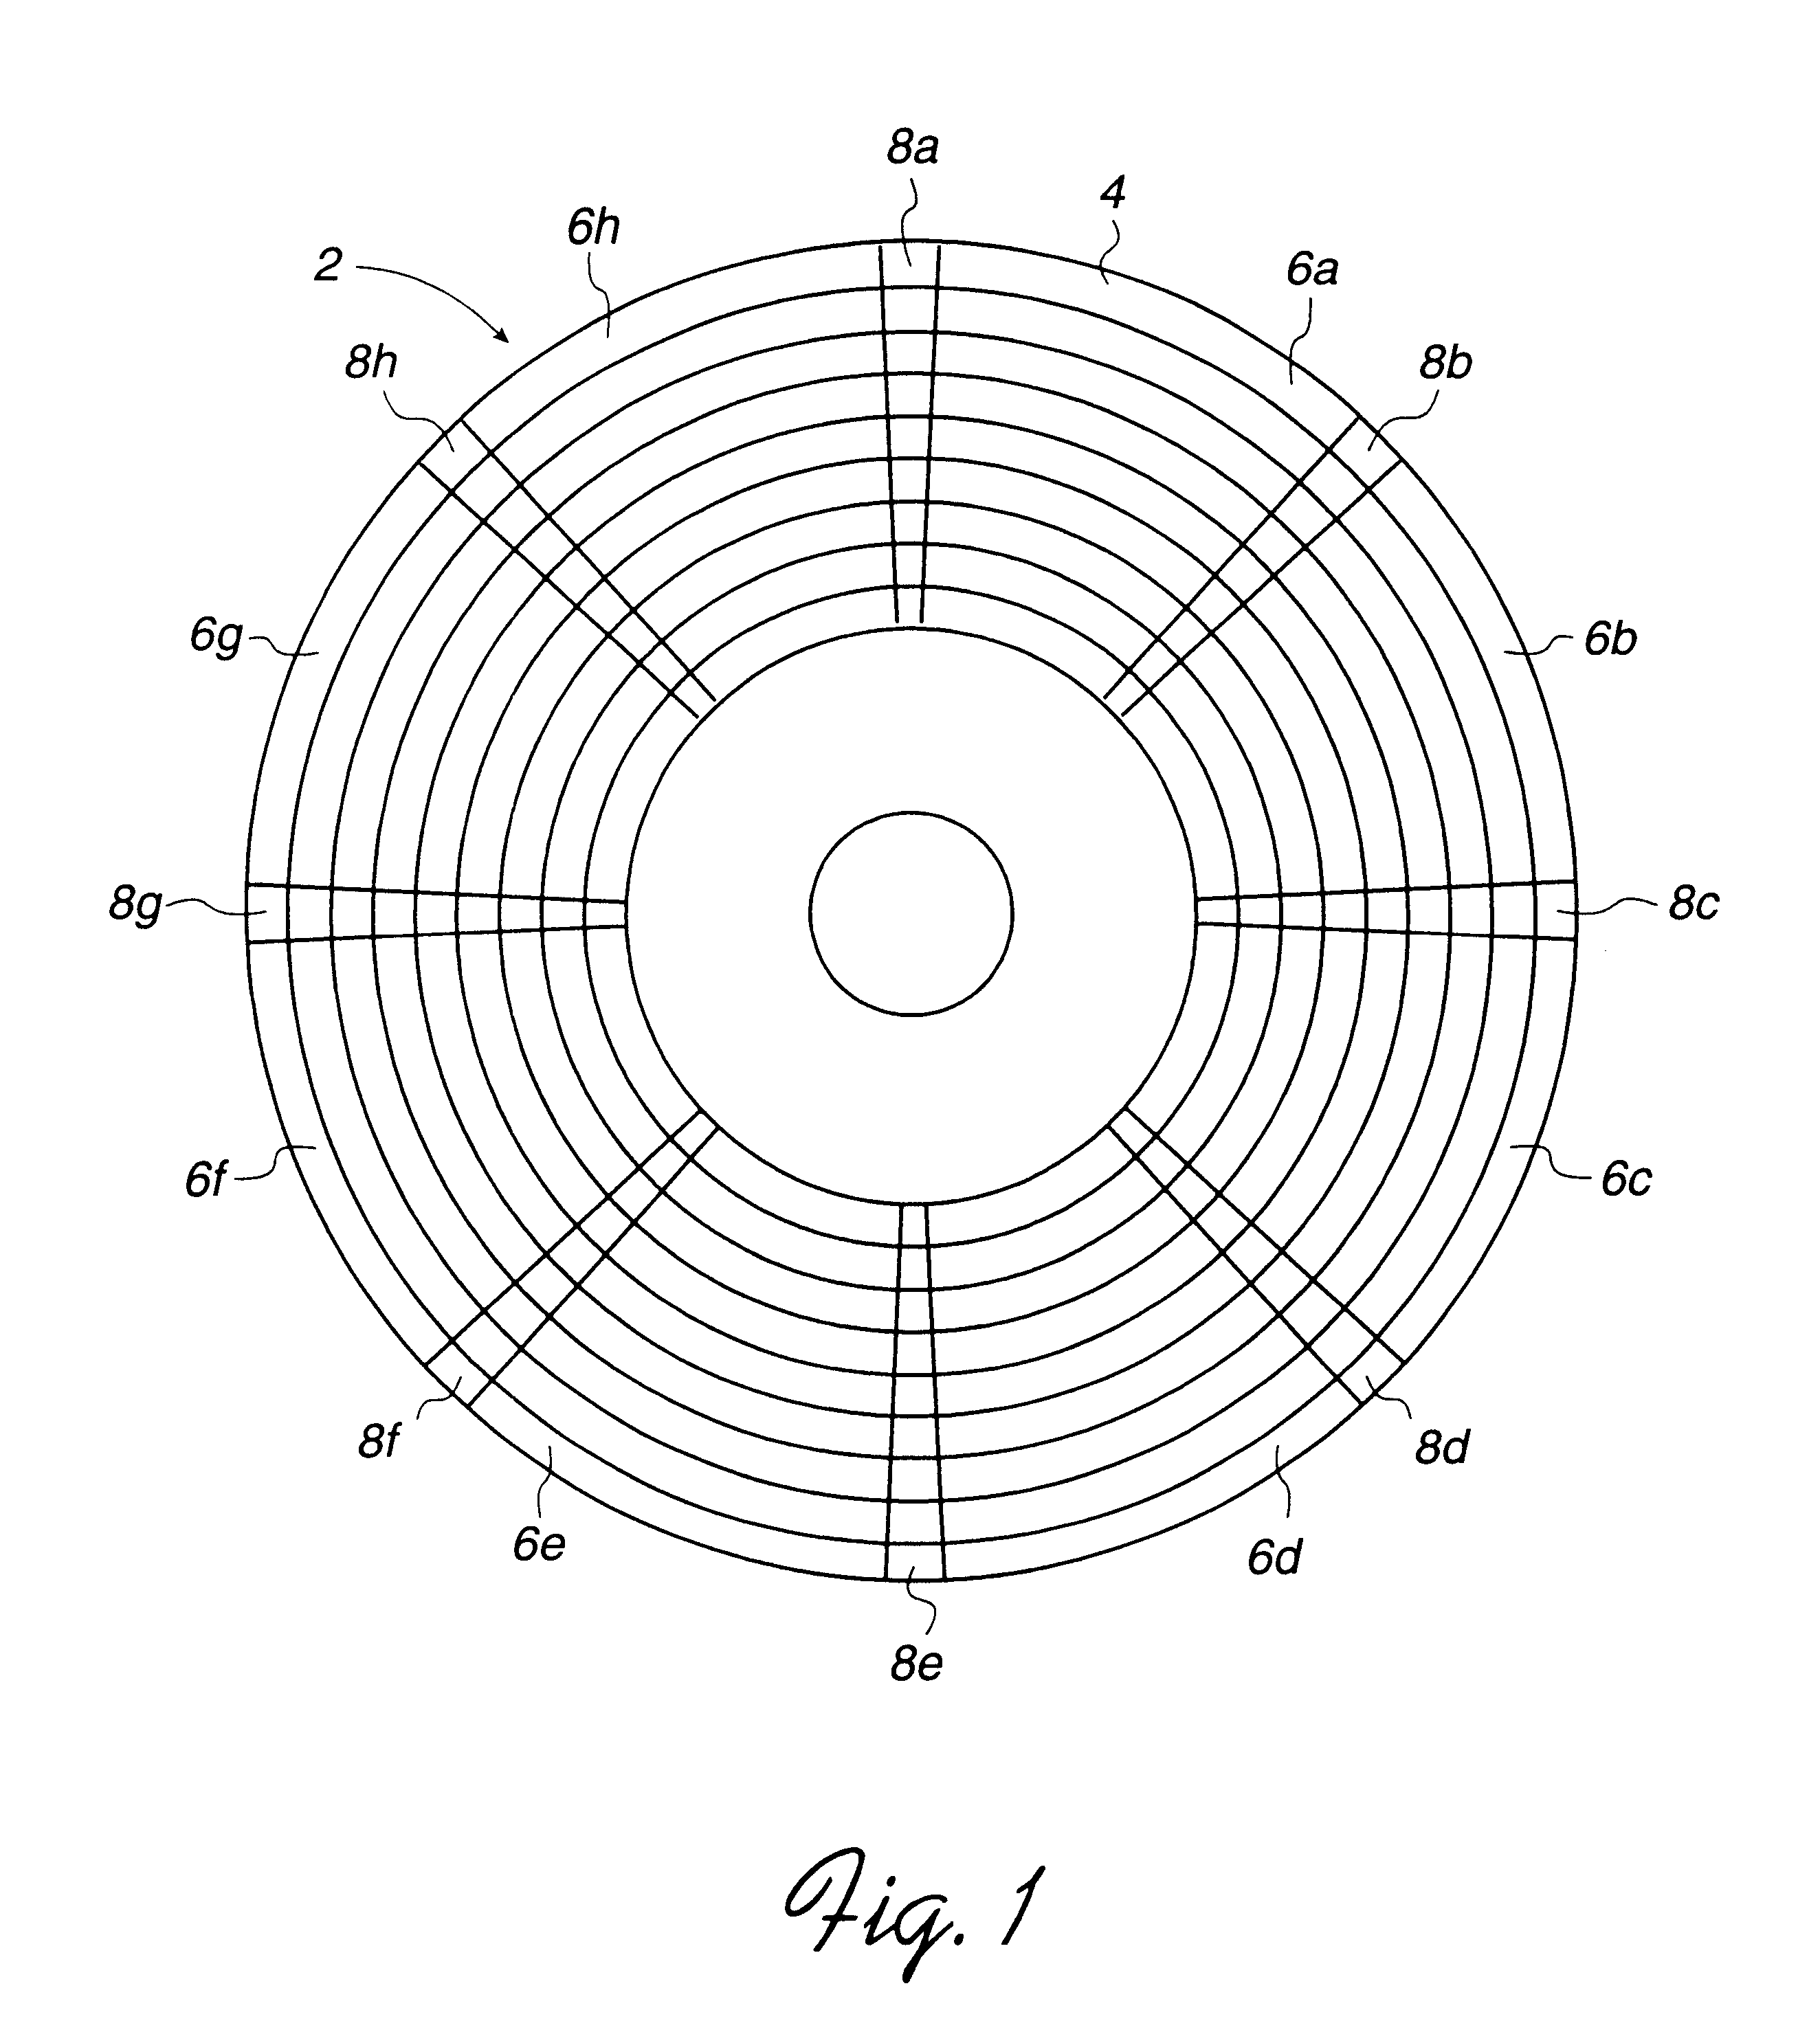 Method, system, and program for mapping logical addresses to high performance zones on a storage medium